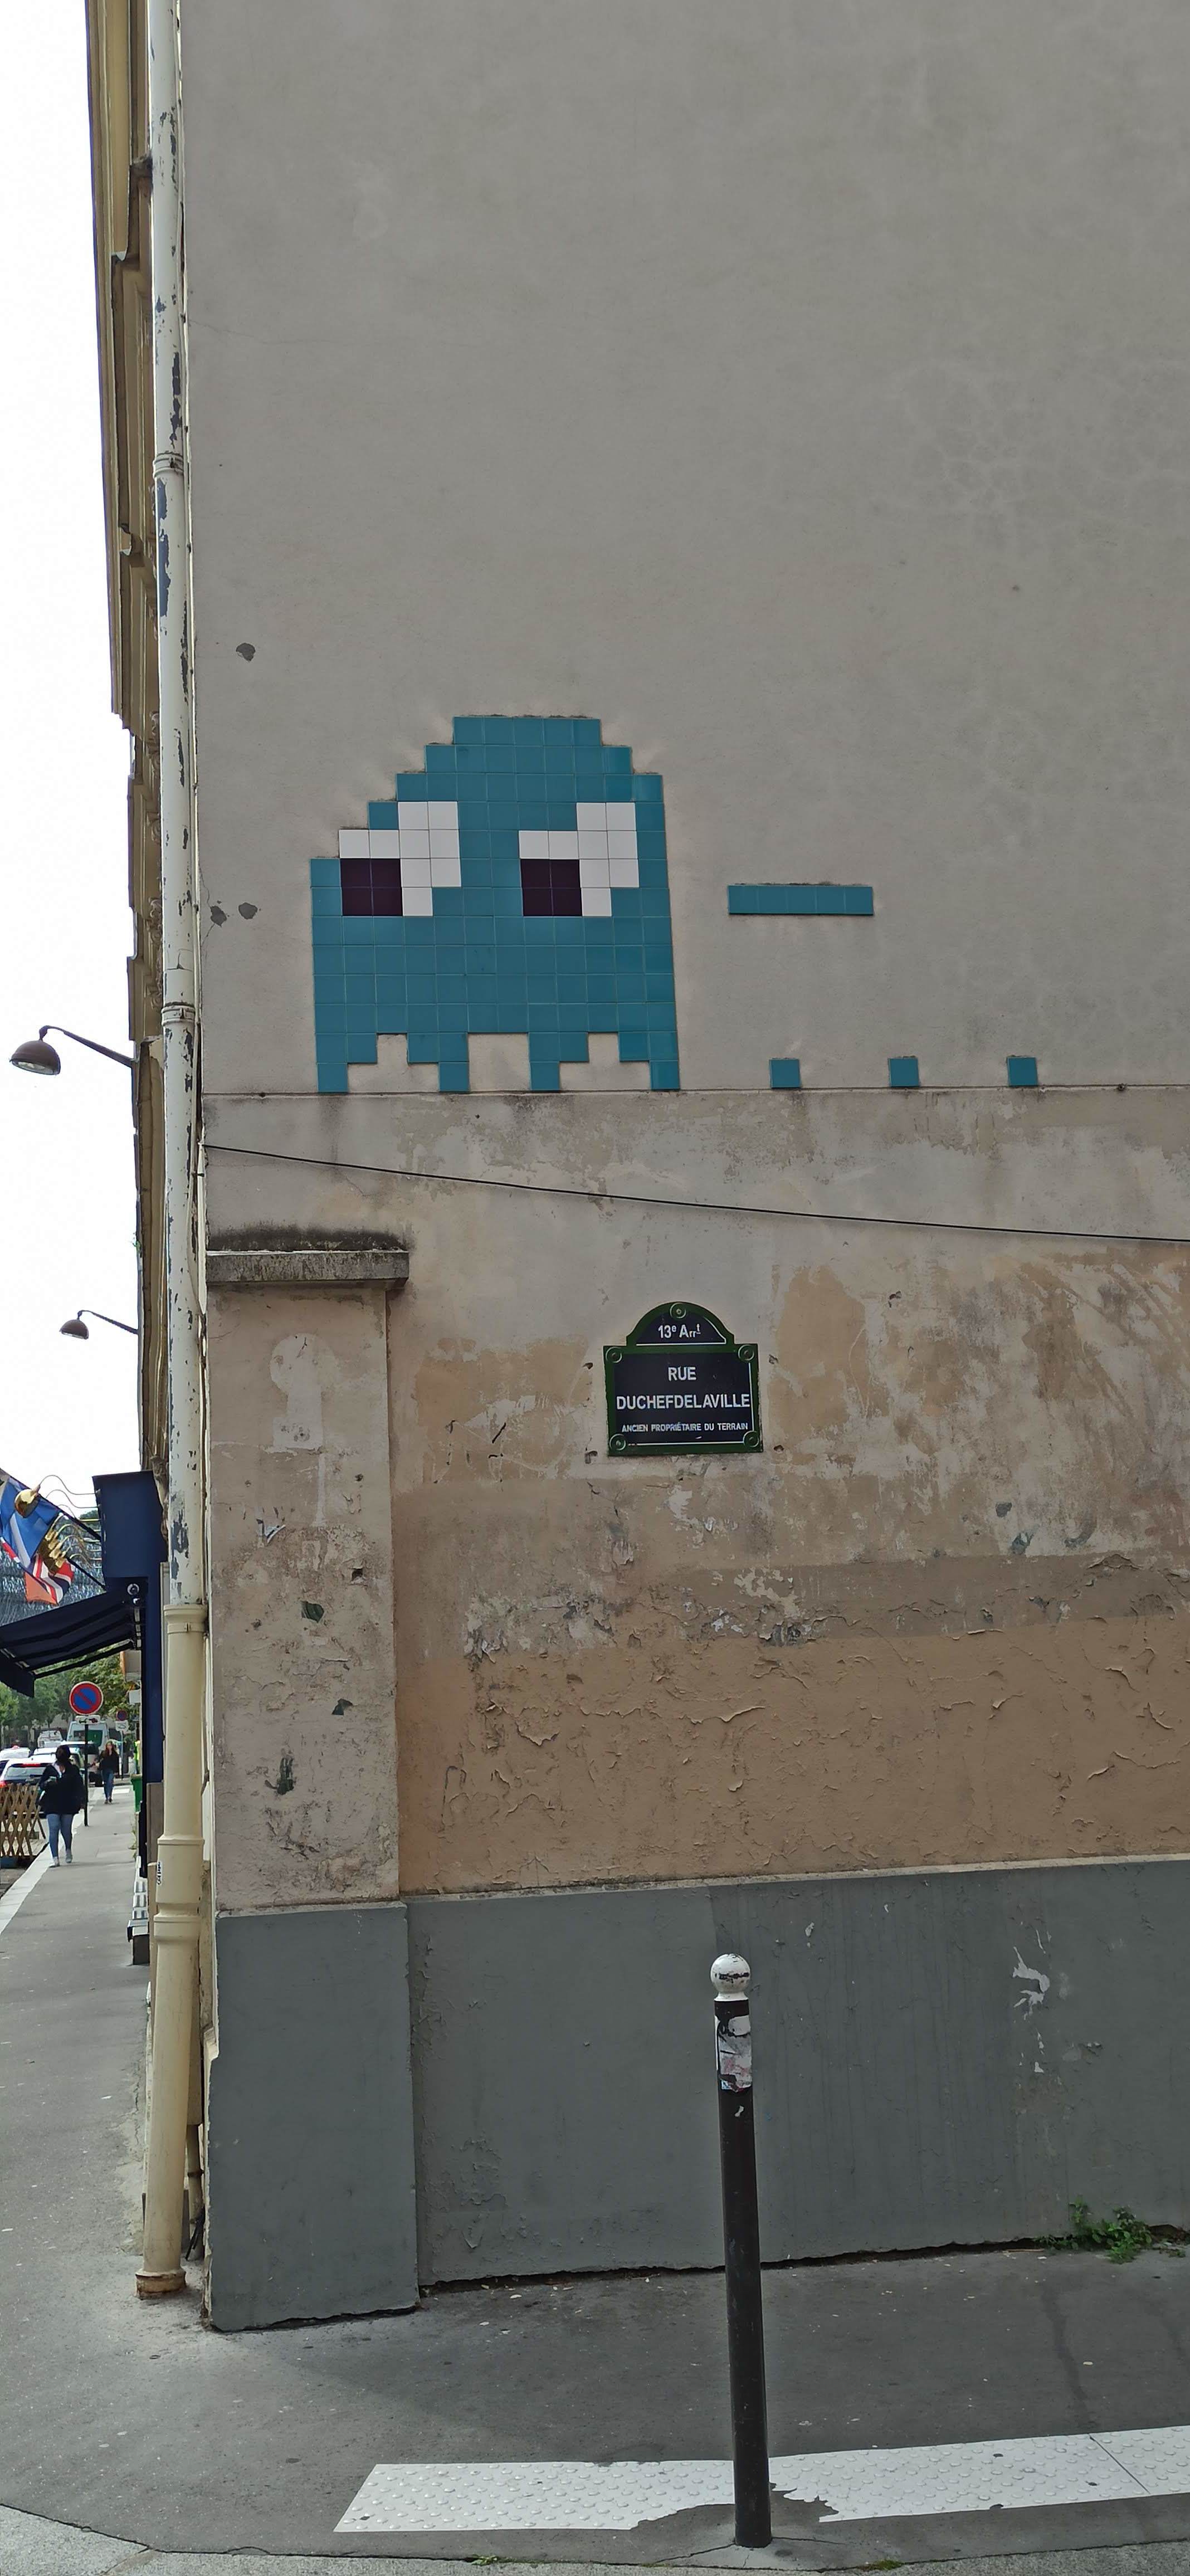 Graffiti 5487  by the artist Invader captured by Rabot in Paris France